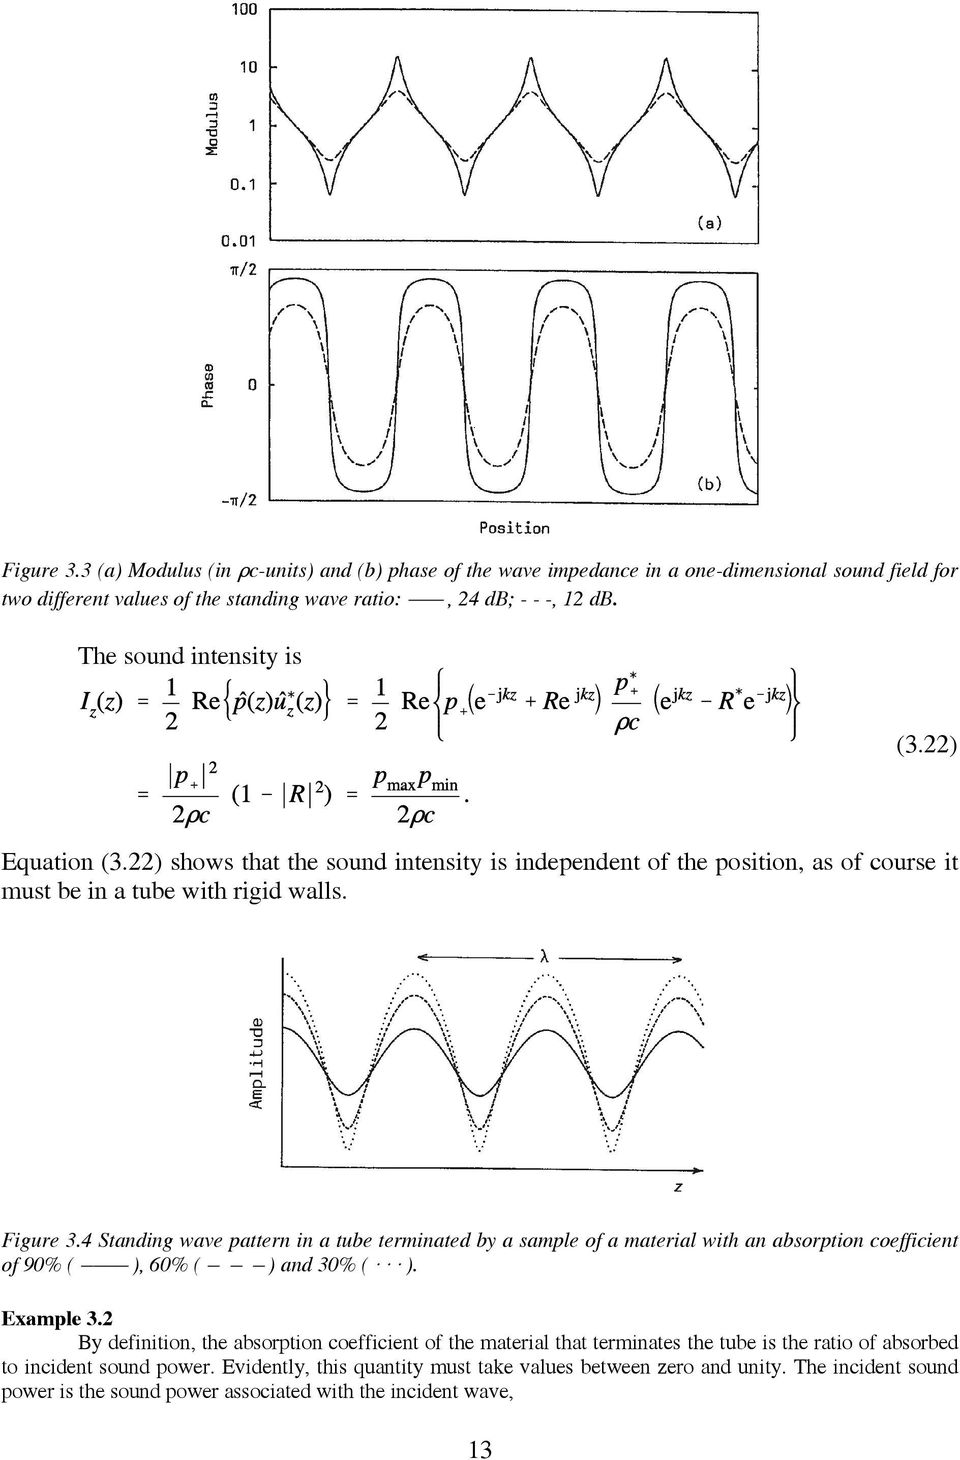 4 Standing wave pattern in a tube terminated by a sample of a material with an absorption coefficient of 90% ( ))) ), 60% ( ) ) ) and 30% ( A A A ). Example 3.